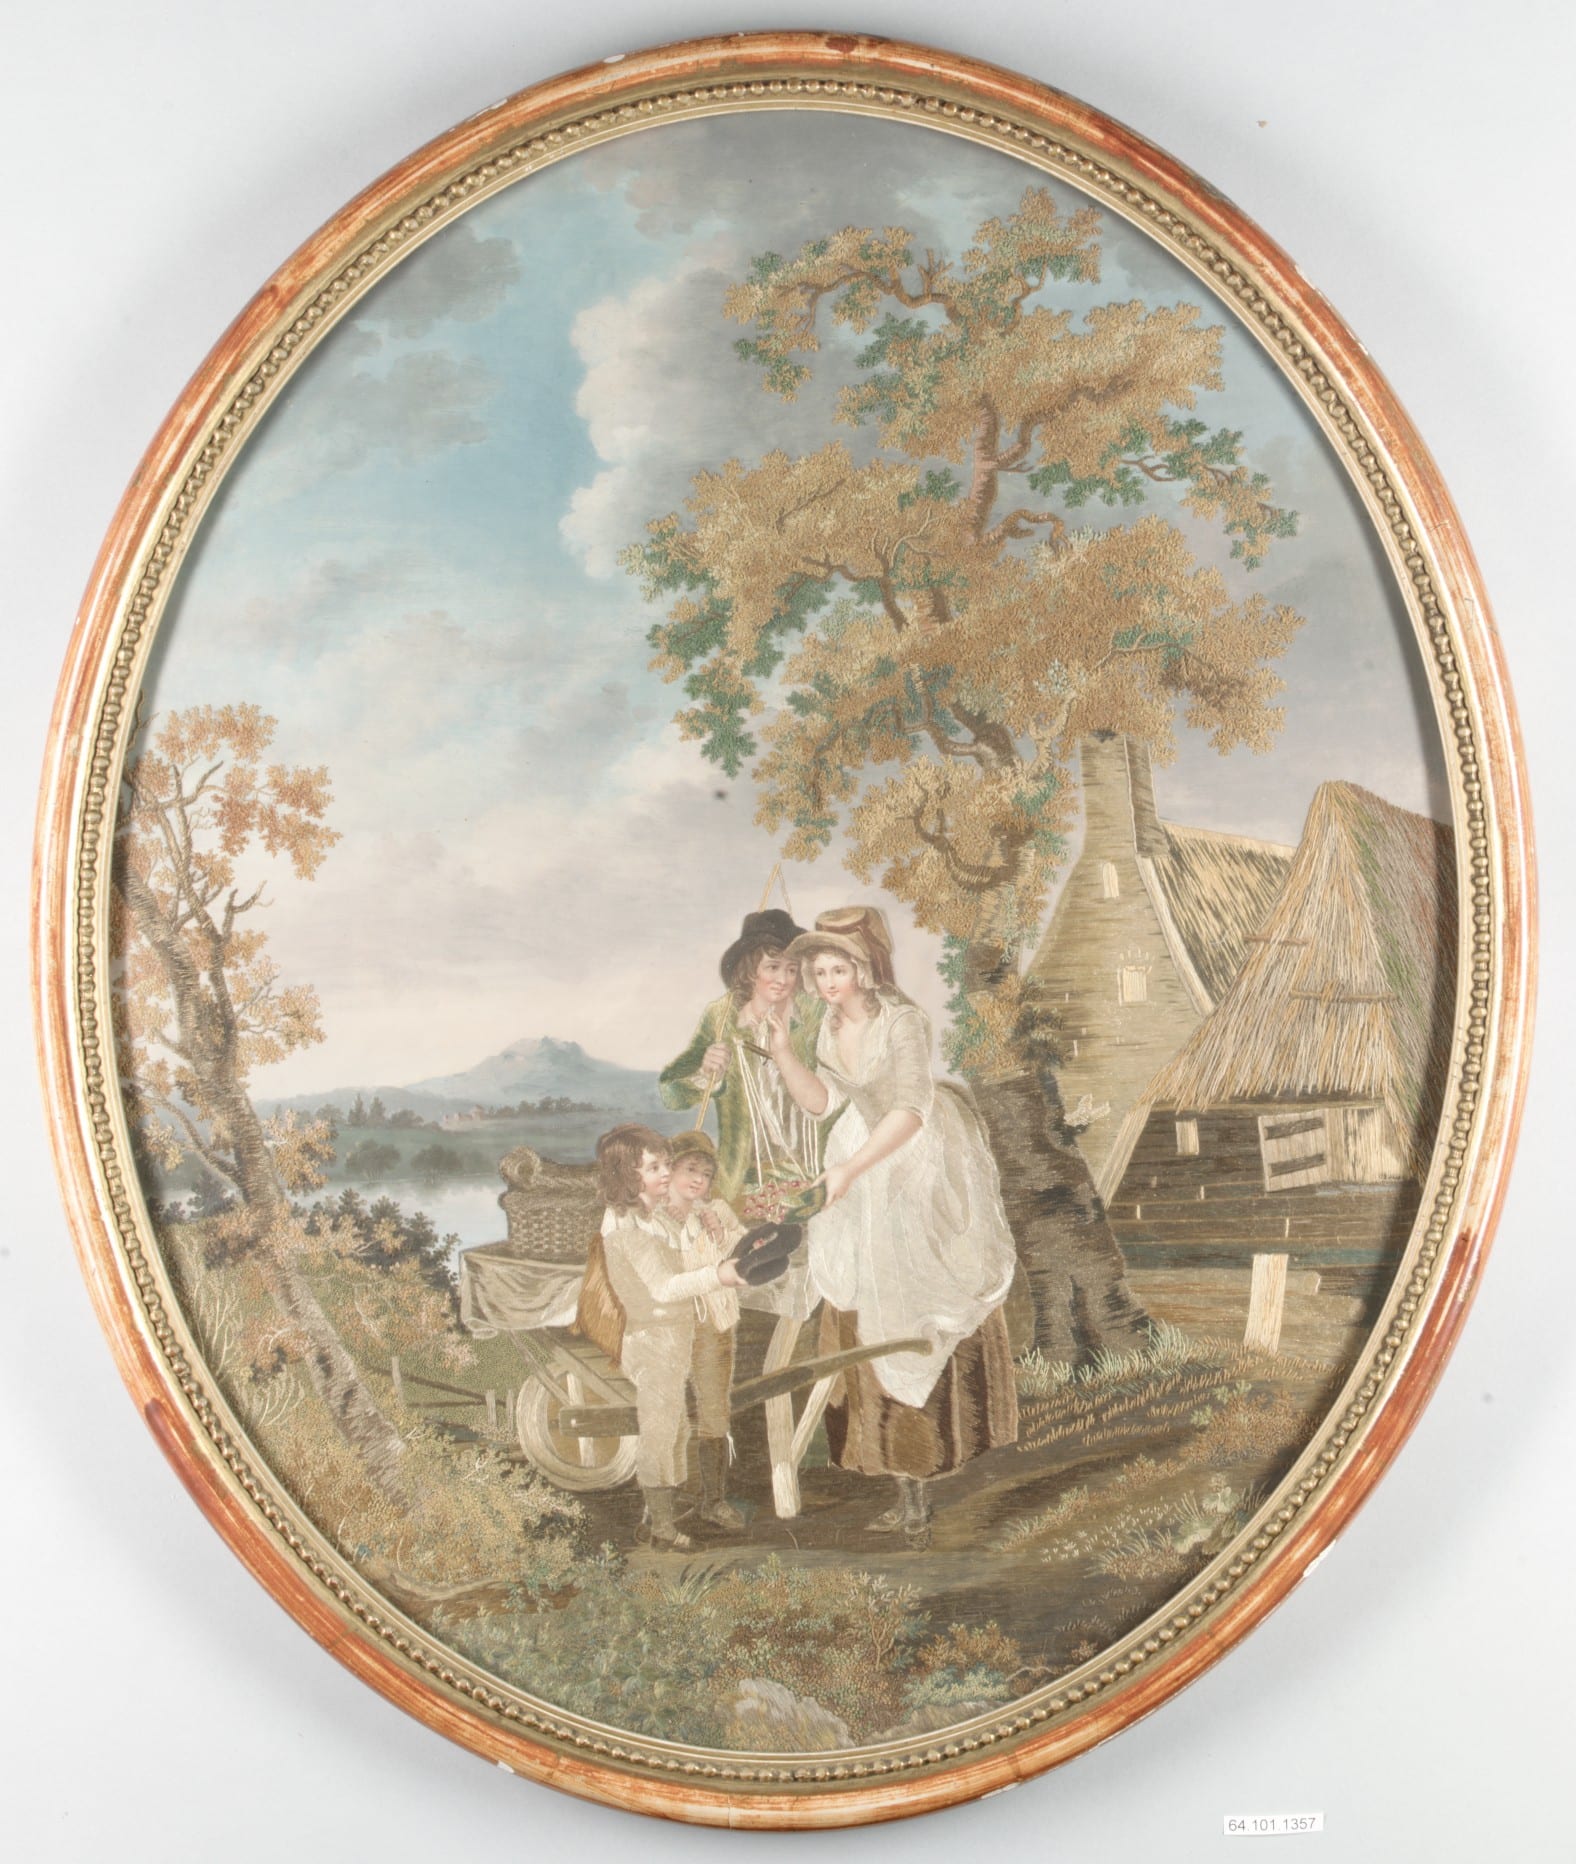 This oval embroidery shows a woman with a scale overflowing with cherries, two young boys holding out a hat filled with cherries, and a man with a whip standing behind the woman’s shoulder and gazing amorously at her face. They are in a pastoral landscape with a mountain and lake in the far background and a house and barn with thatched roofs in the nearer background. 